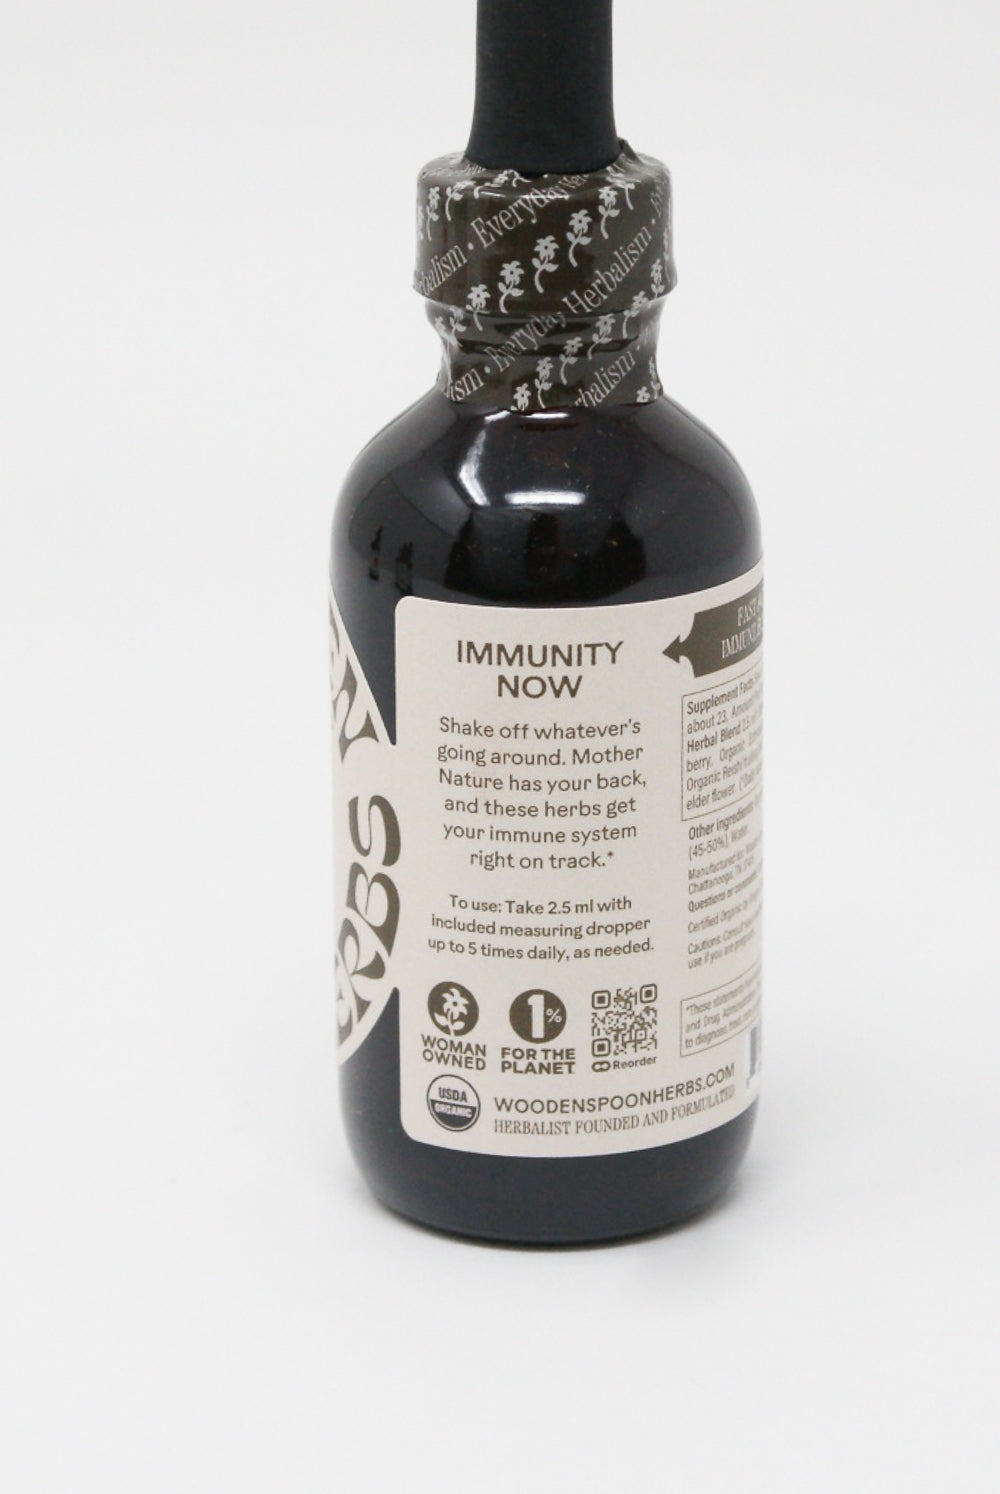 Wooden Spoon Herbs - Immunity Now Tincture back label view